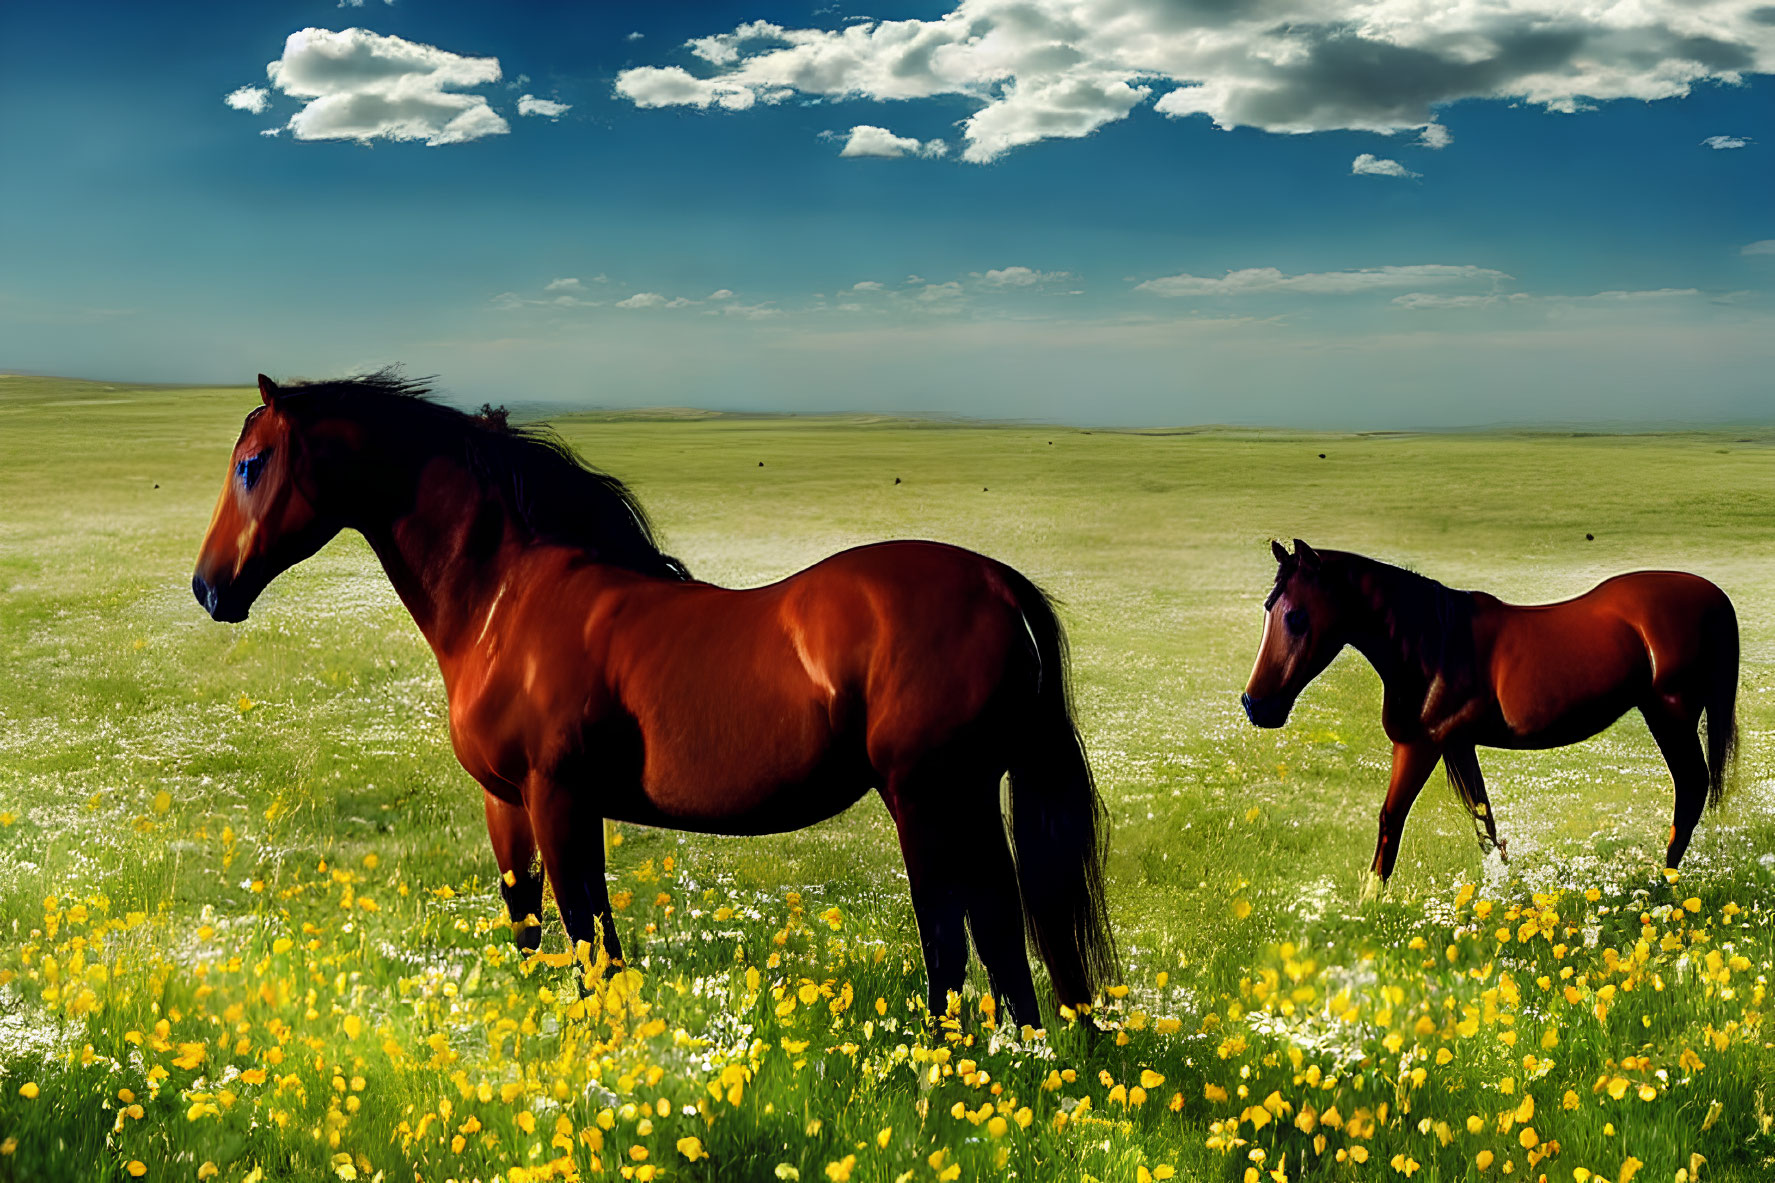 Two horses in green field with yellow flowers under blue sky and scattered clouds